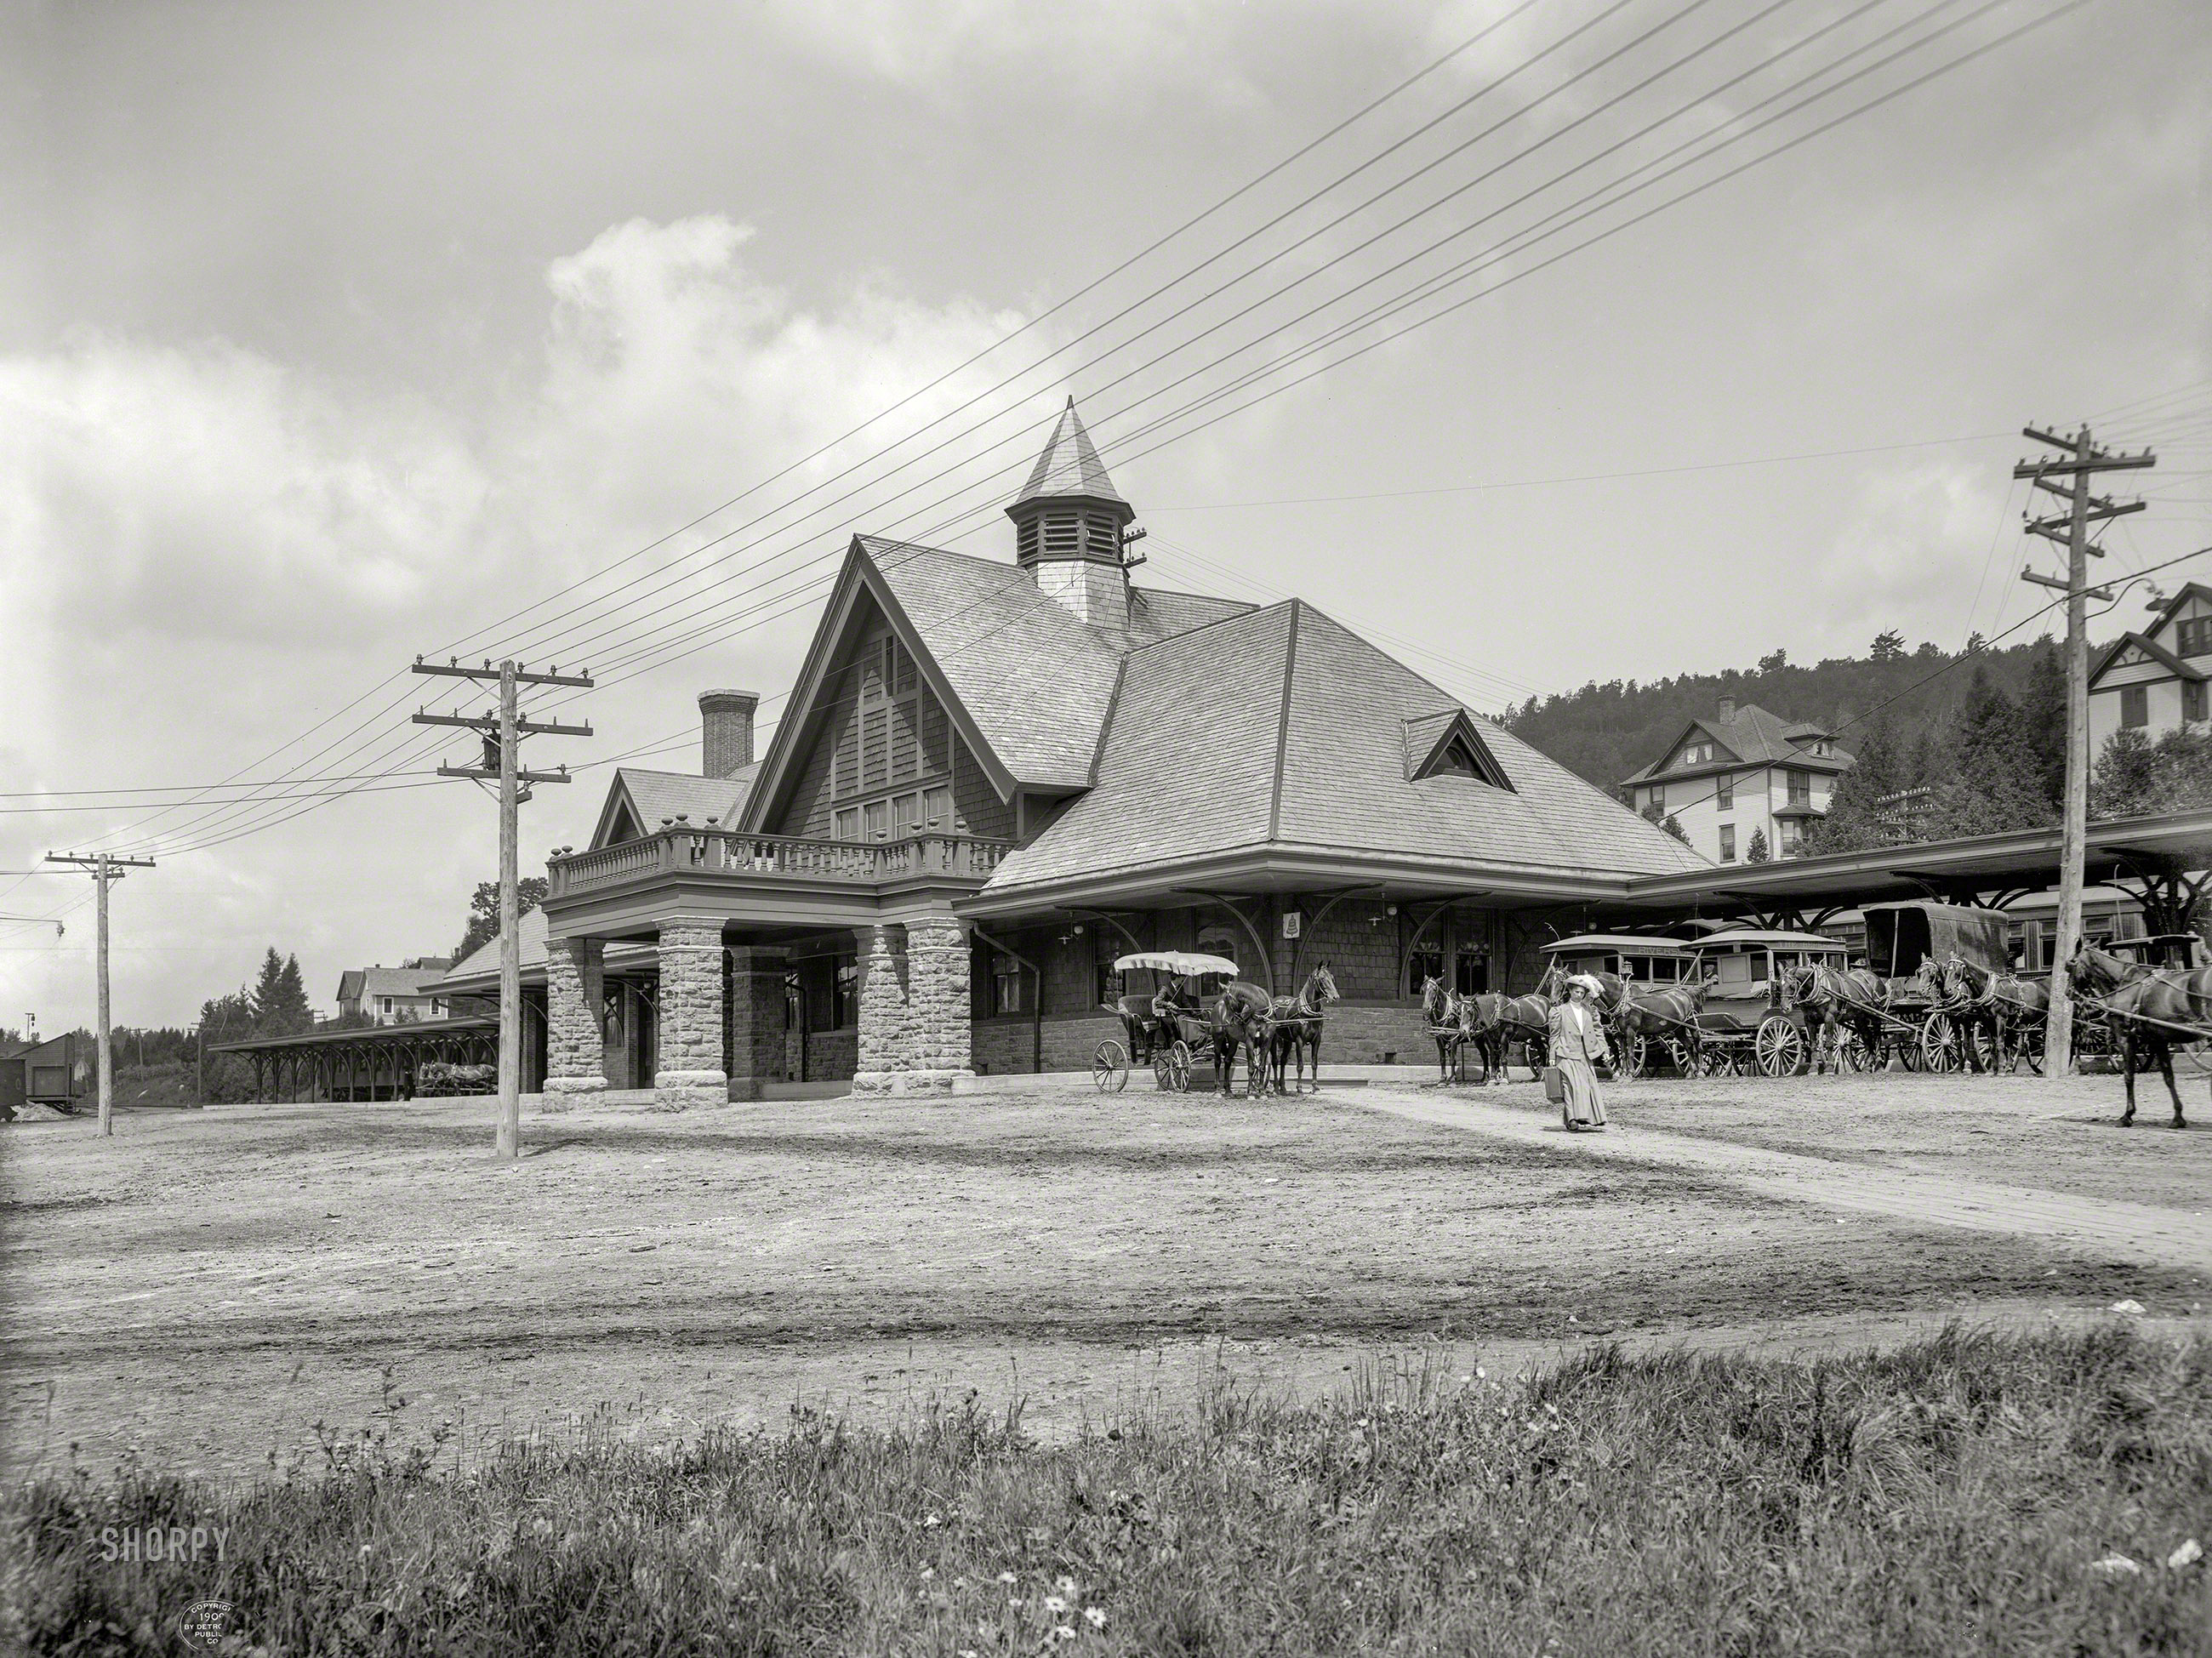 Circa 1909. "Central Station, Saranac Lake, Adirondack Mountains, N.Y." 8x10 inch dry plate glass negative, Detroit Publishing Company. View full size.